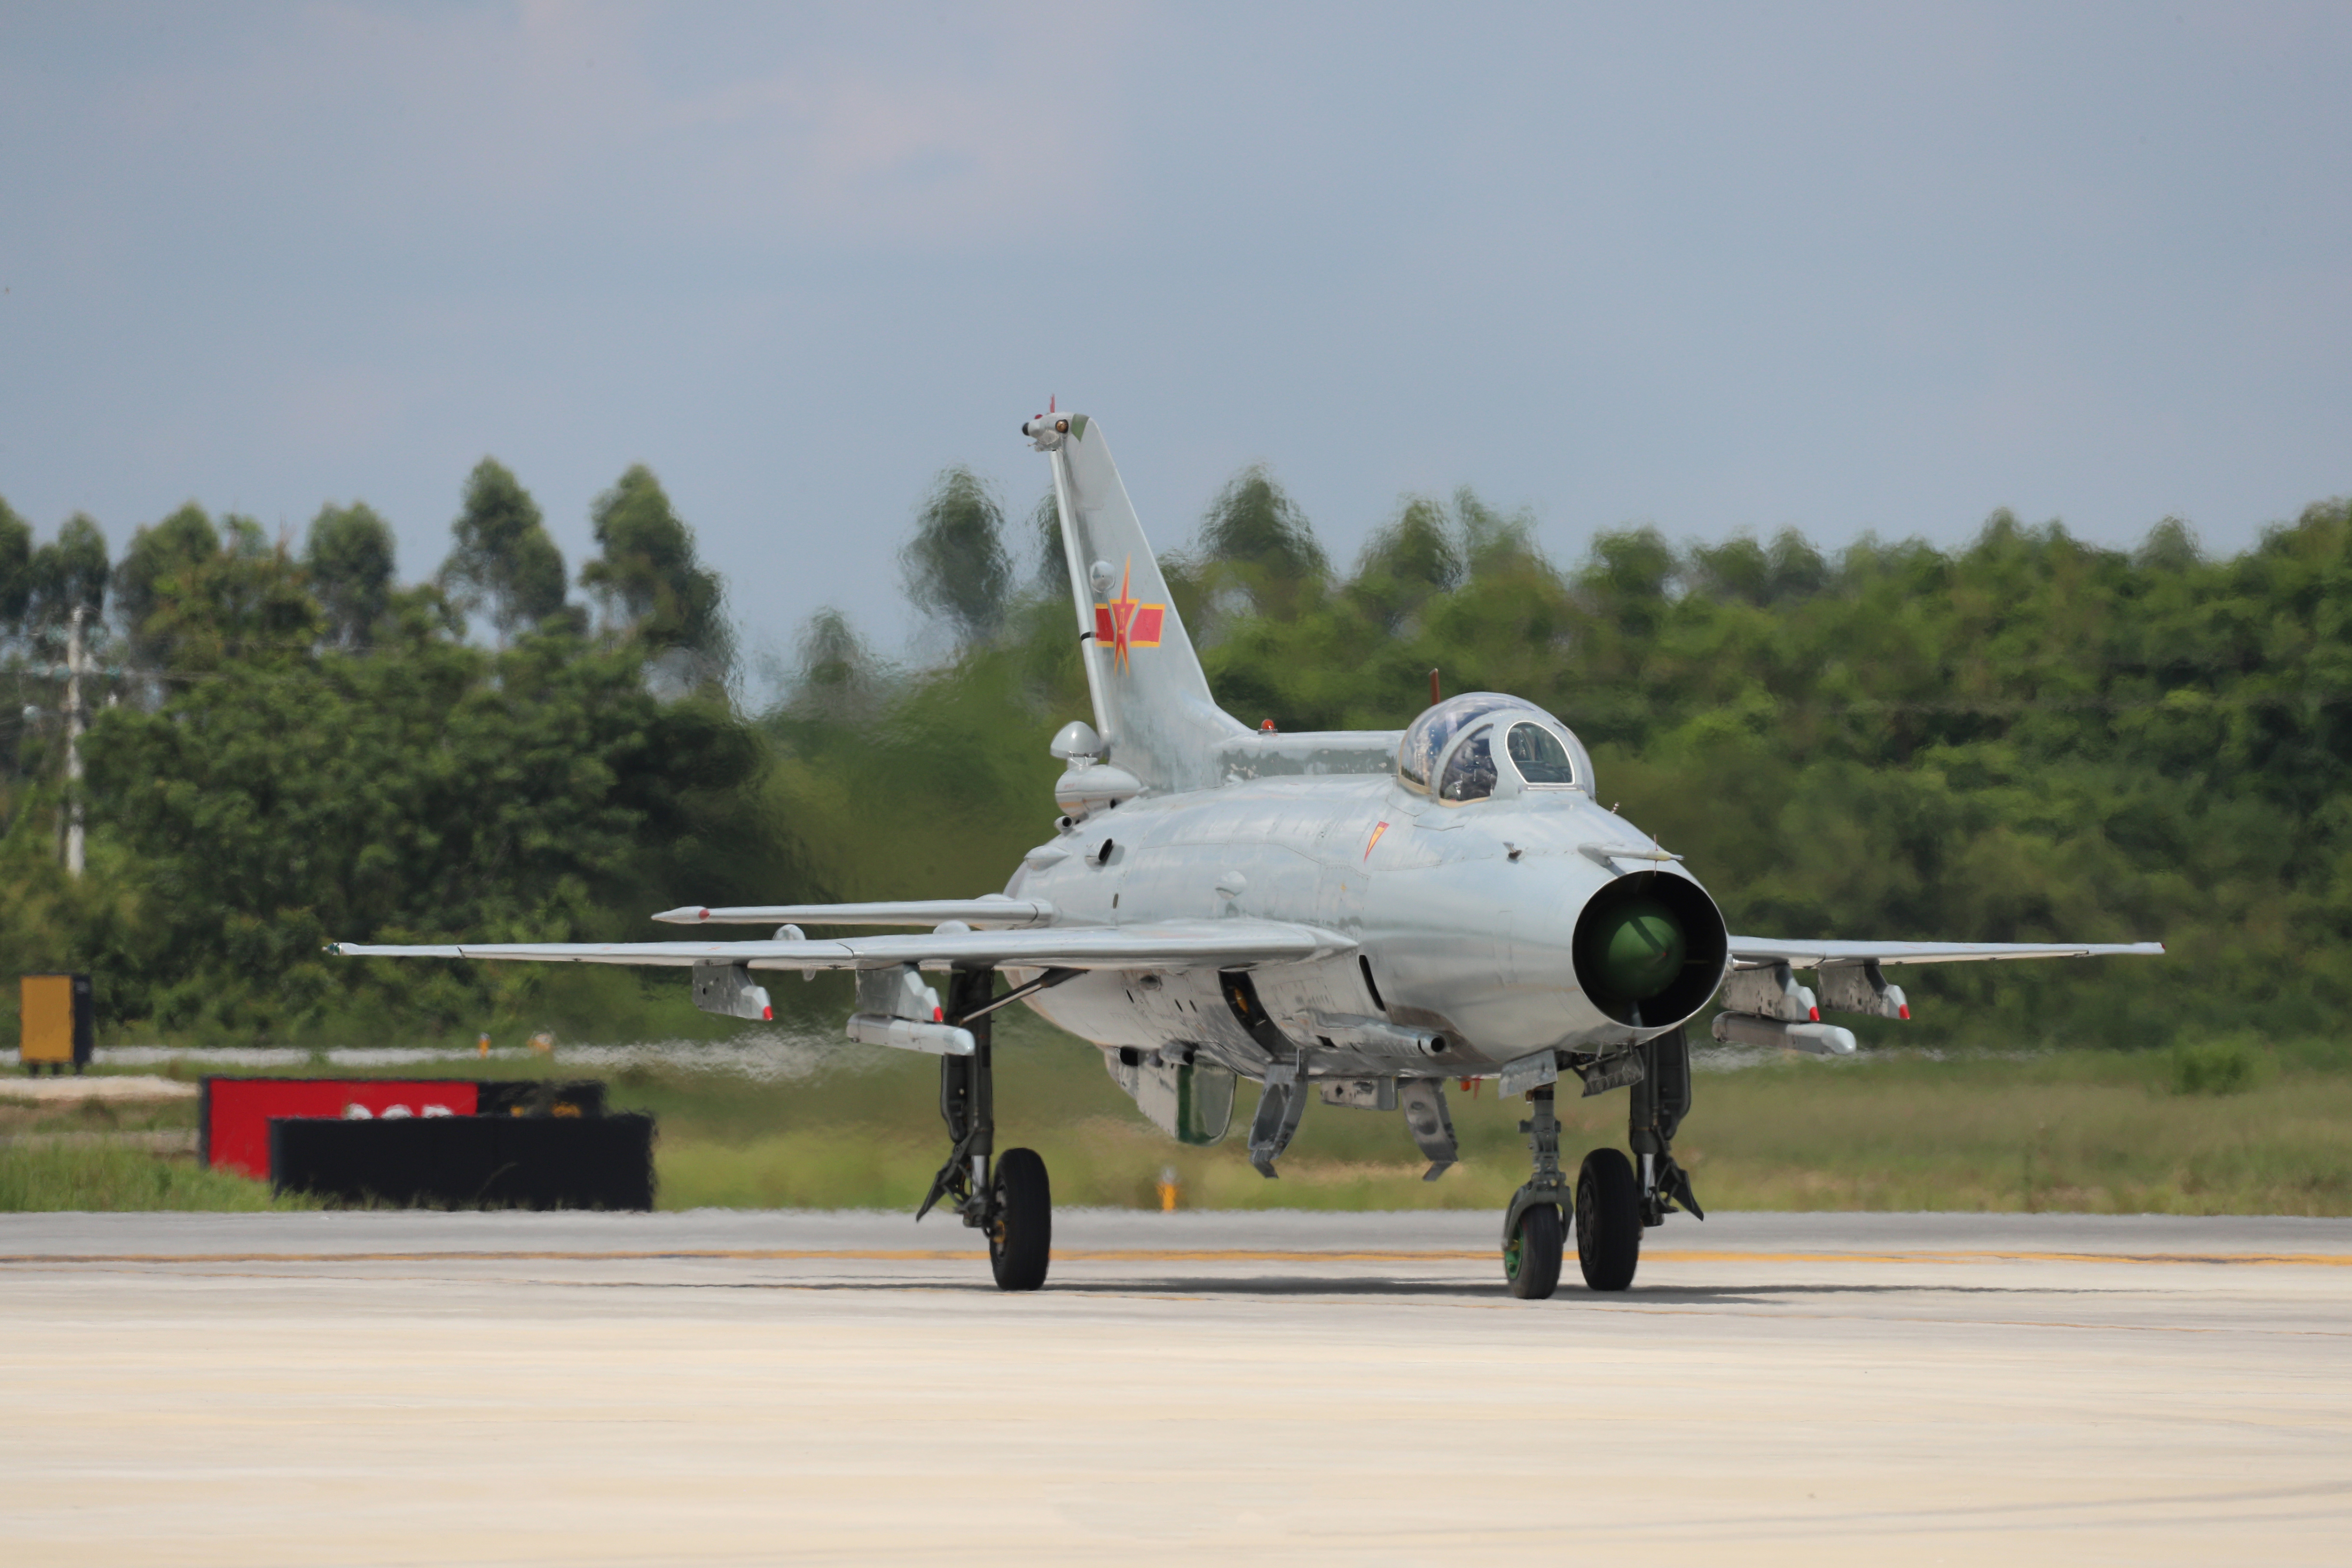 General 5472x3648 PLAAF Chengdu J-7 military military aircraft trees frontal view pilot Chinese aircraft